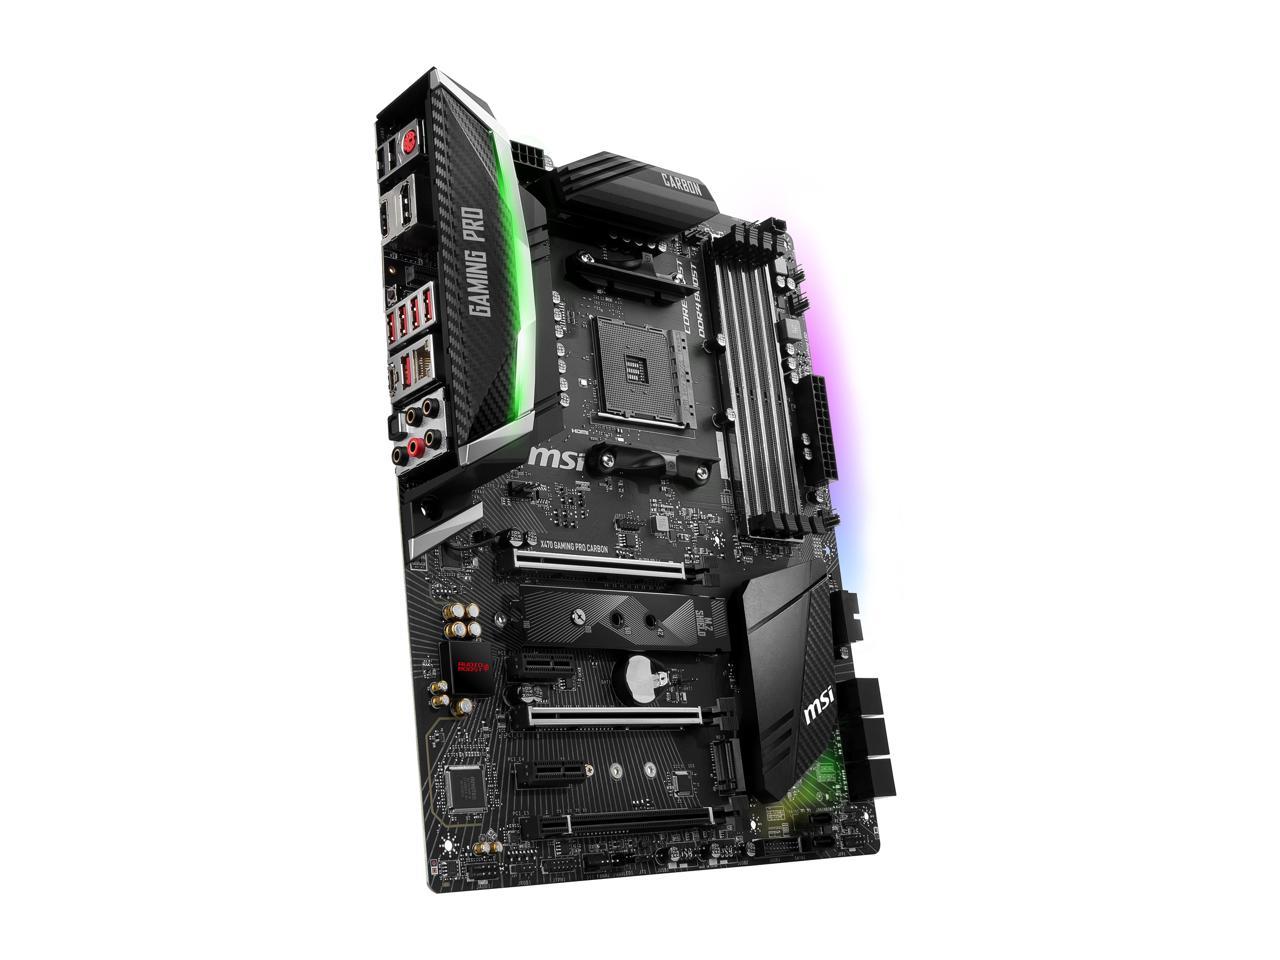 MSI PERFORMANCE GAMING X470 GAMING PRO CARBON AM4 ATX AMD Motherboard